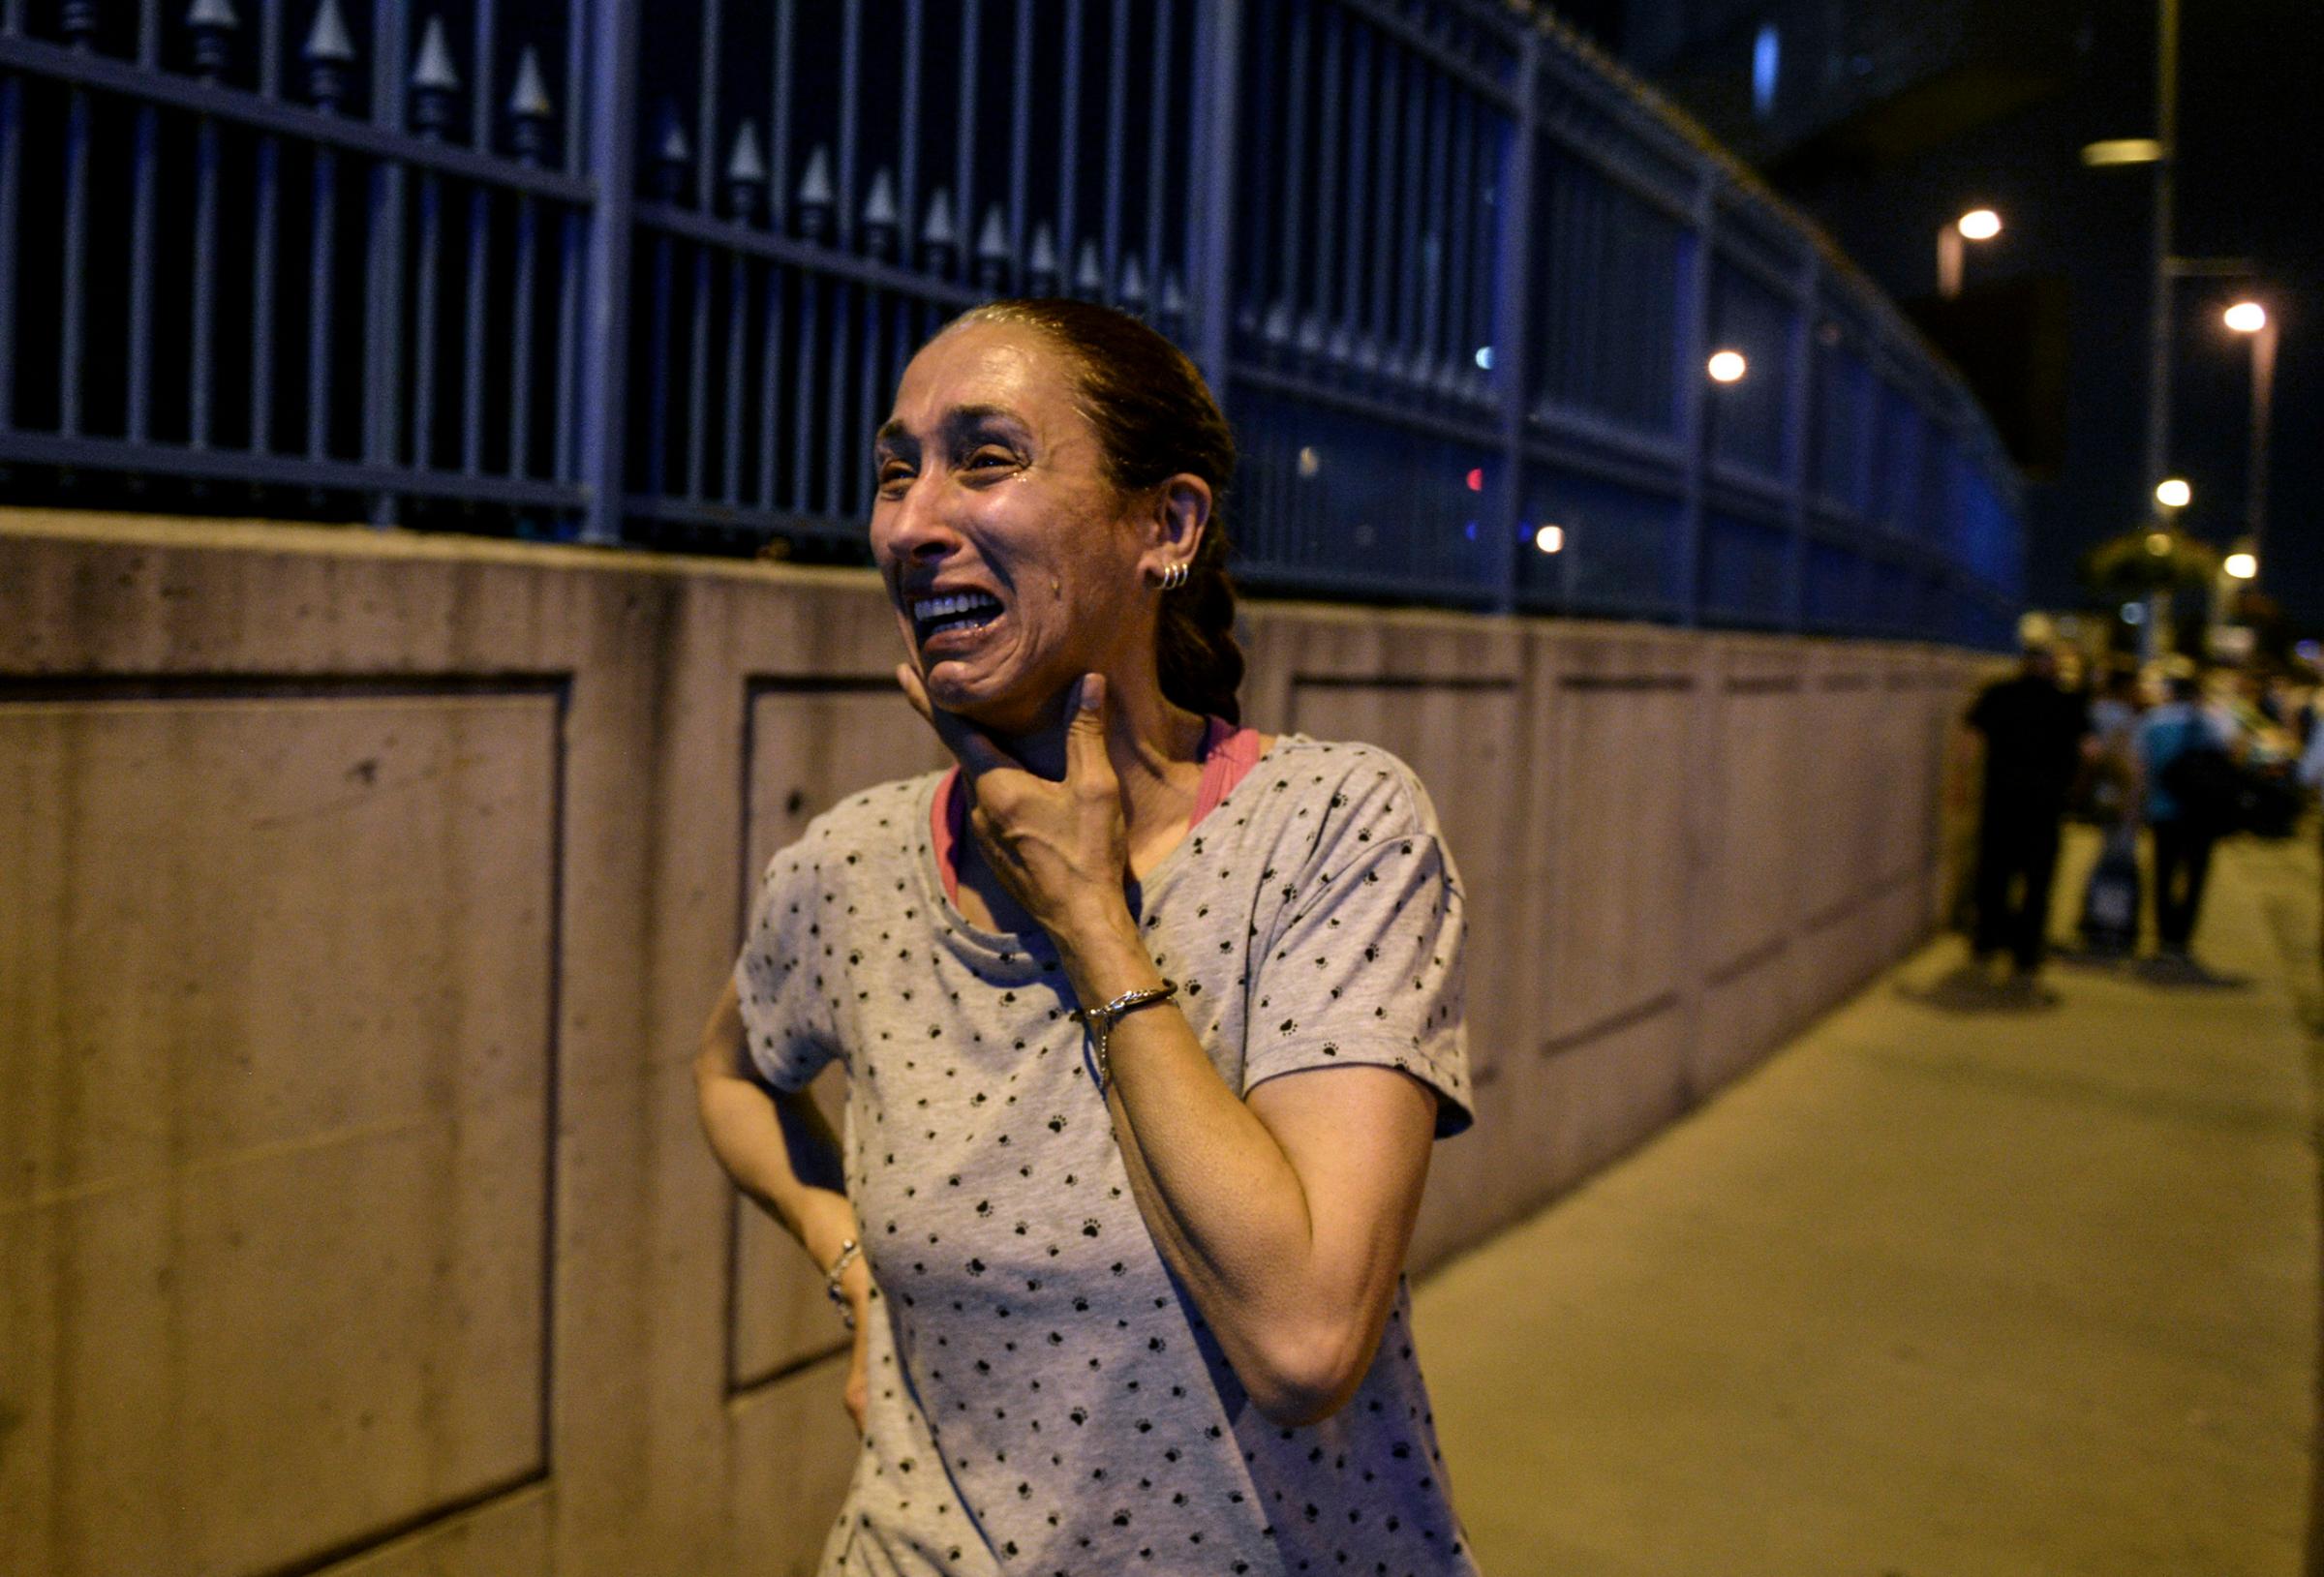 A woman cries outside Istanbul's Ataturk airport following an attack on June 28, 2016.